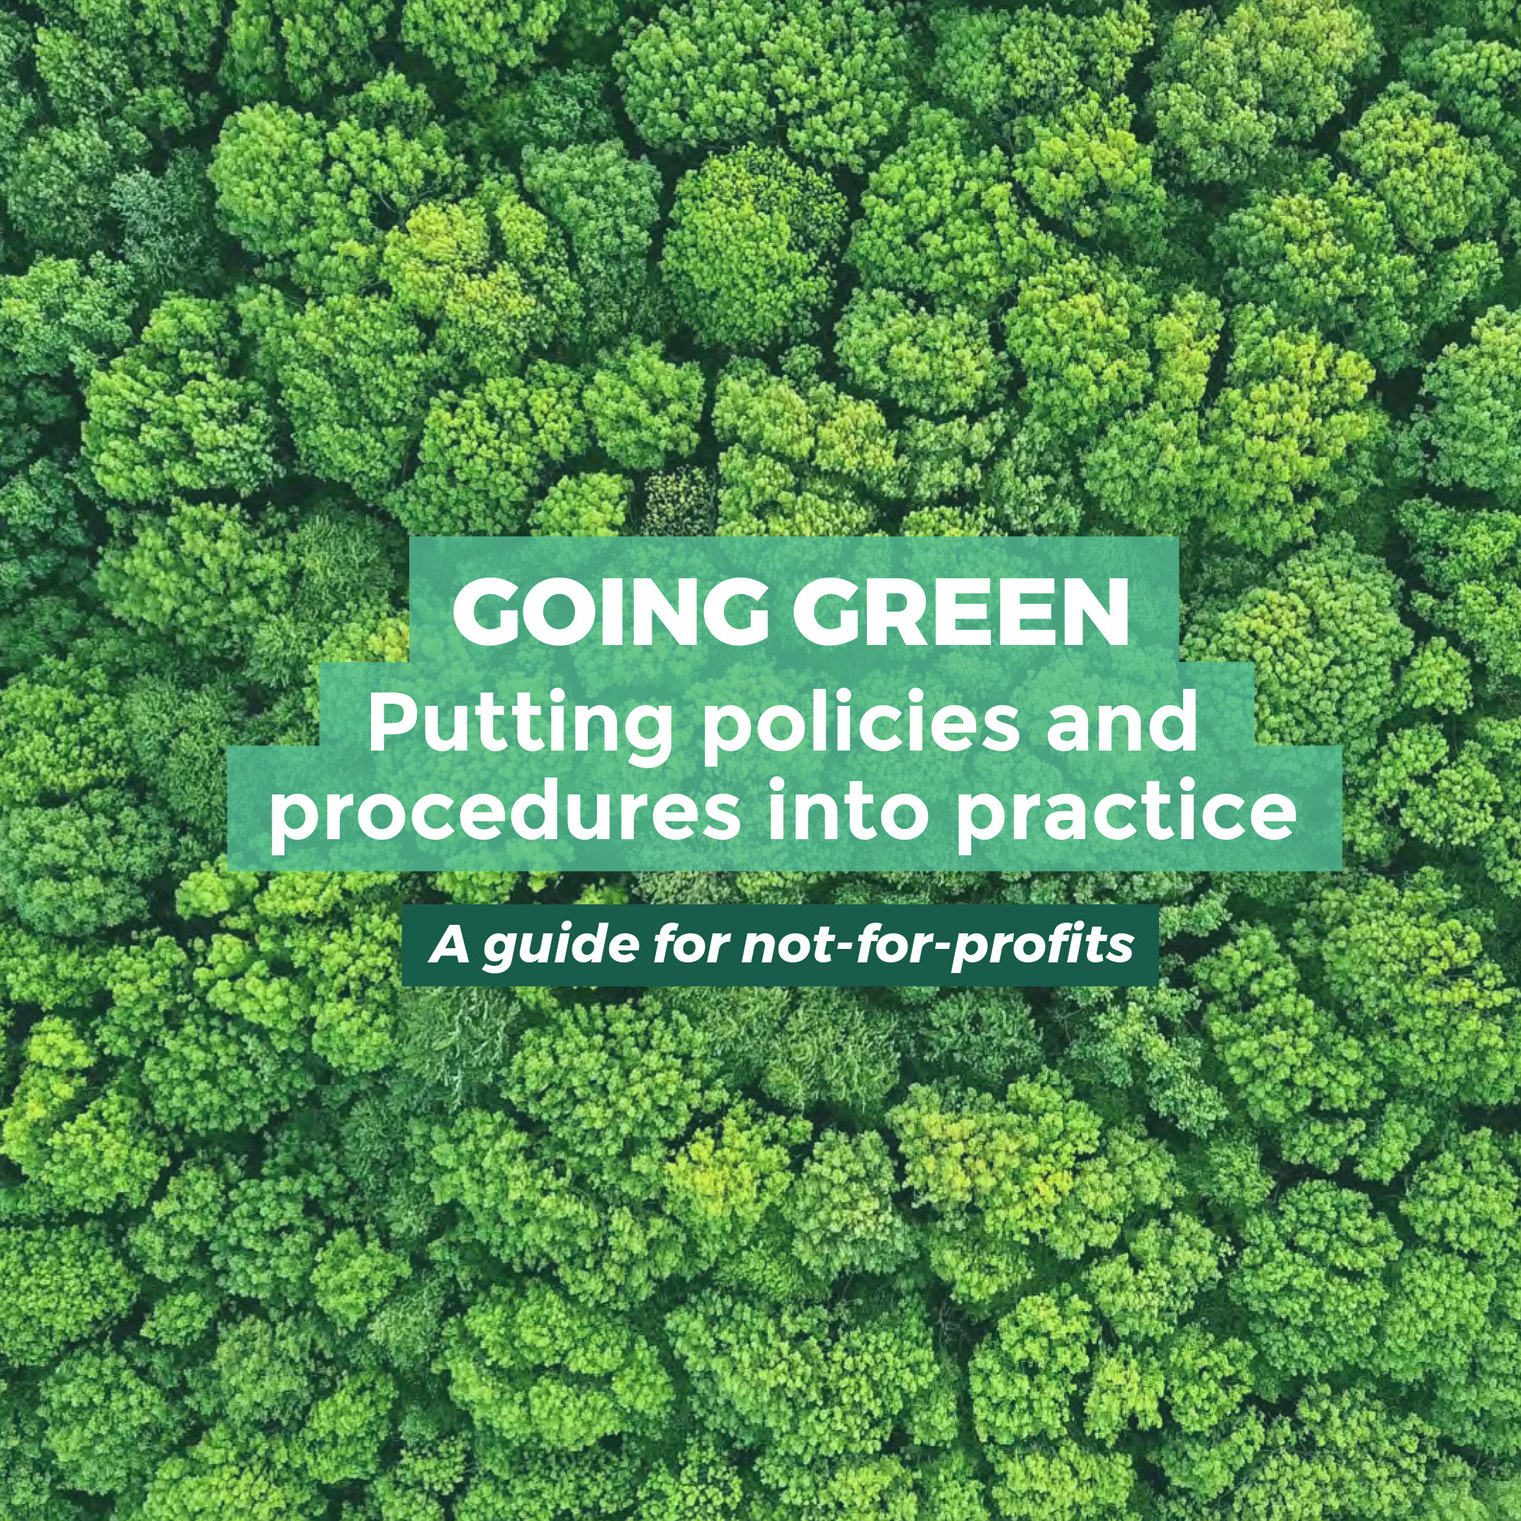 Going Green: putting policies and procedures into practice